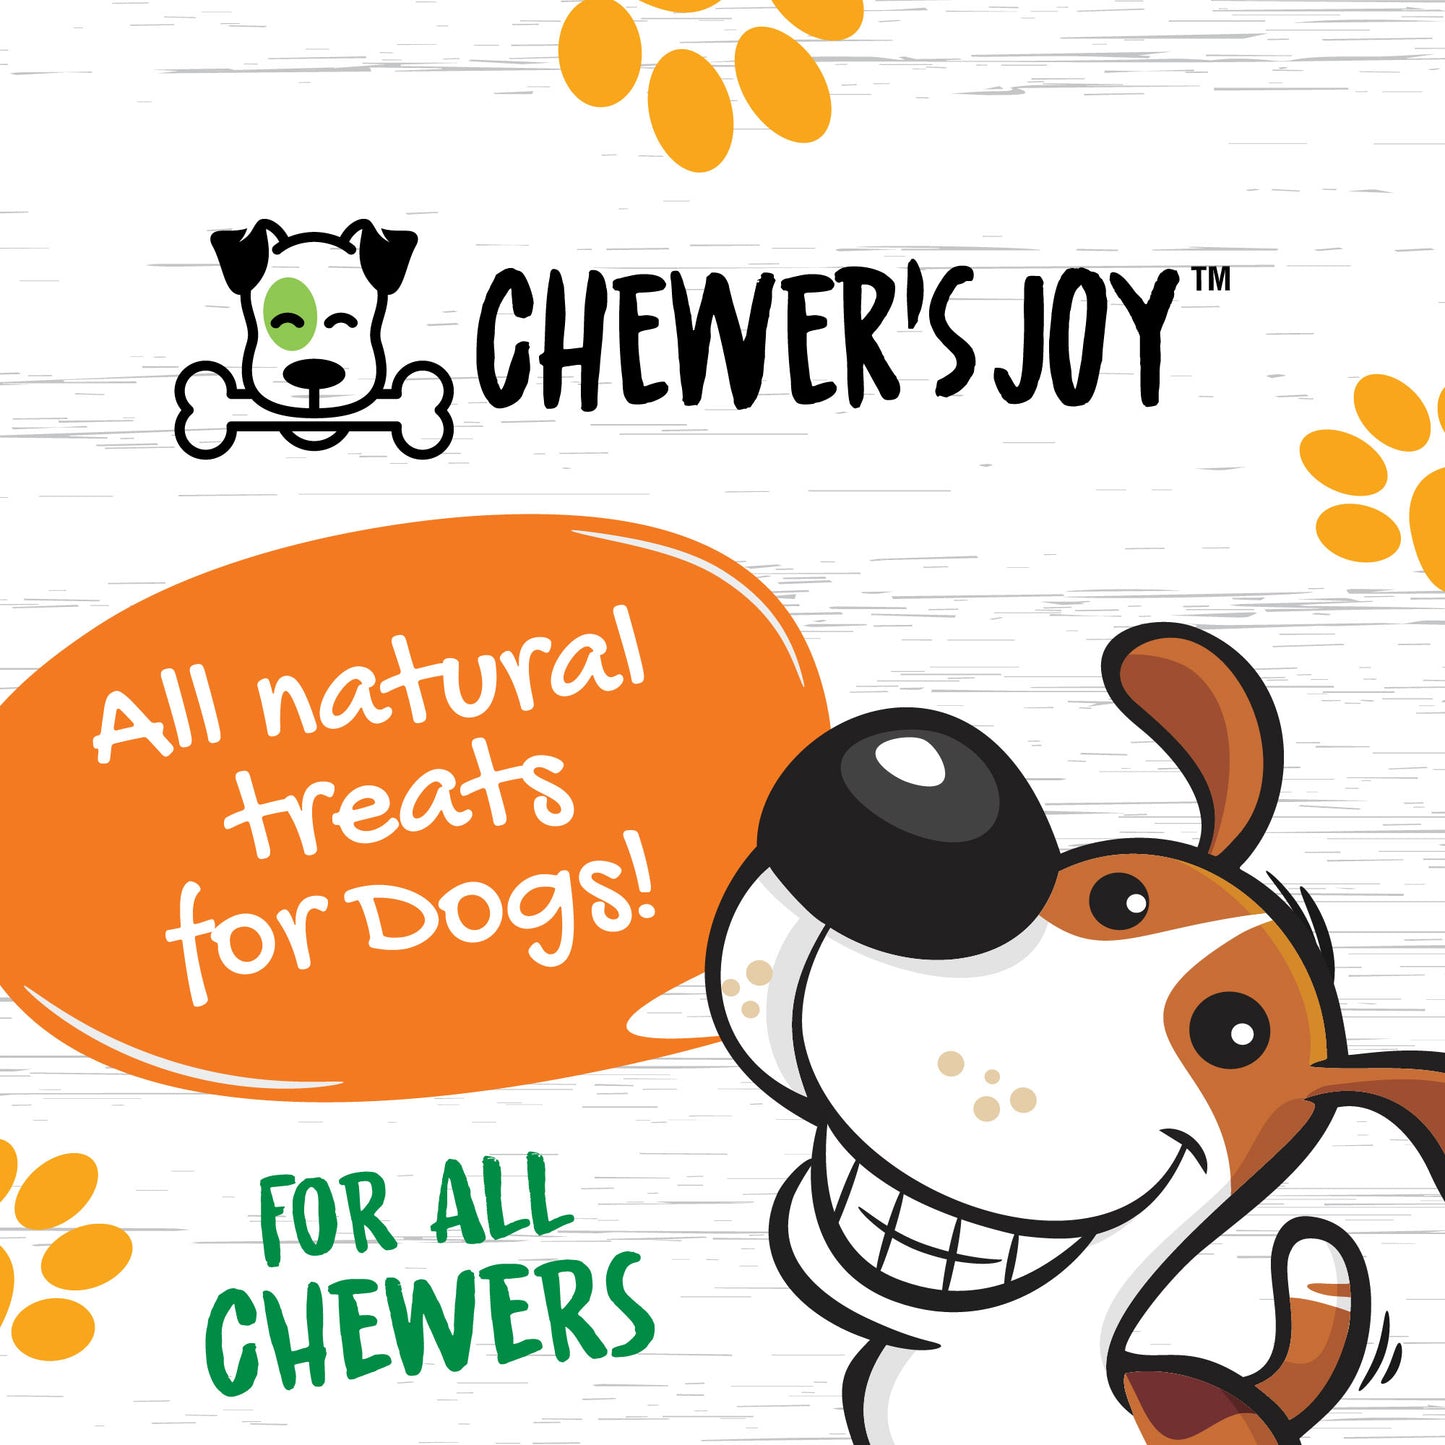 Chewer's Joy Chicken Glazed Collagen Tidbits 15pk 6-7" Dog Treats, High Protein, Support strong Joints, Boost Digestion, Promotes Shiny Coat & Dental hygiene.